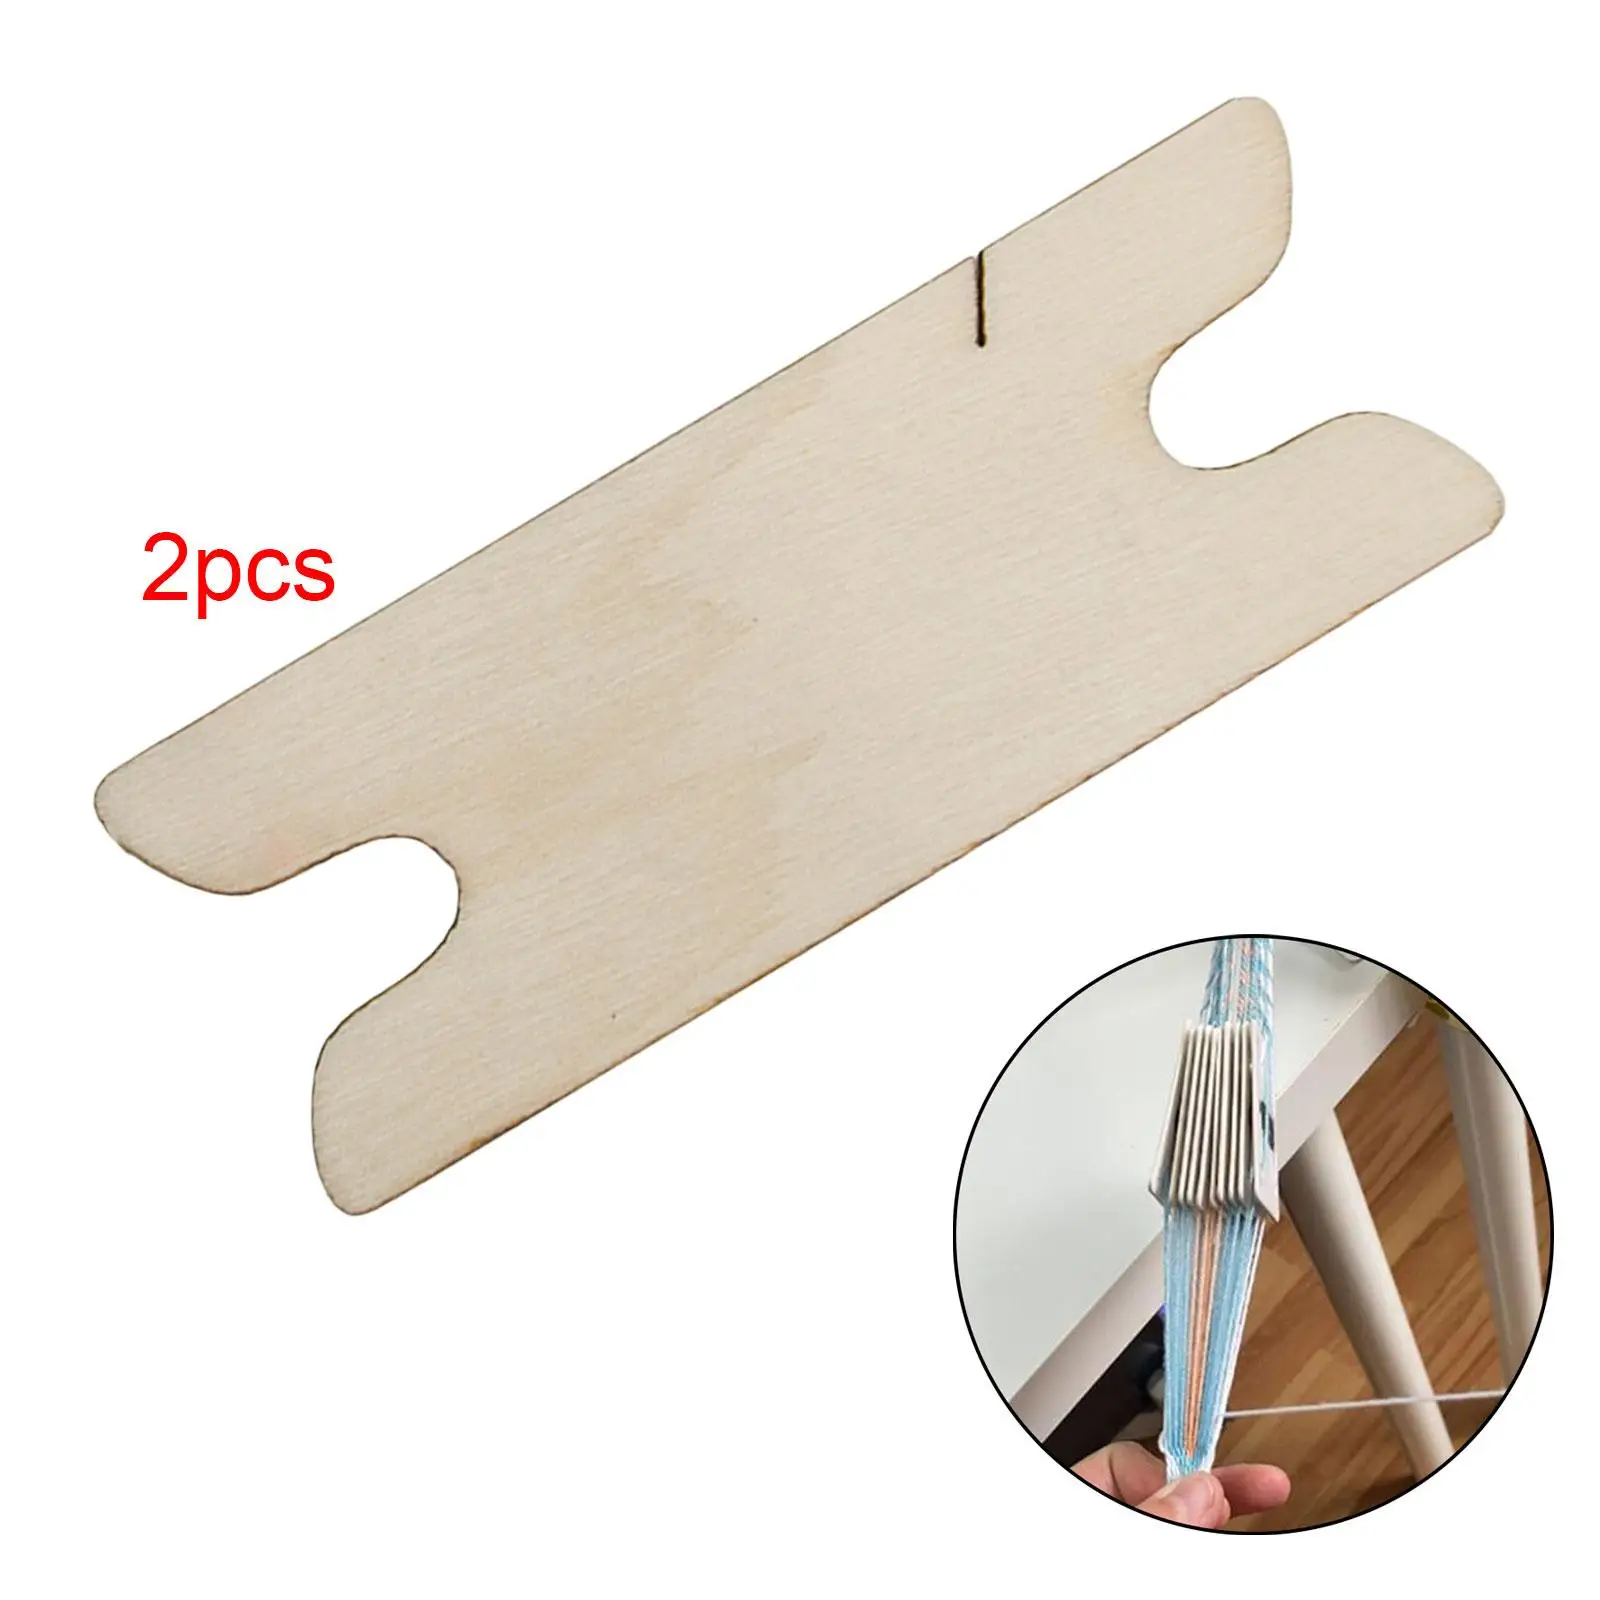 2 Pieces Wooden Weaving Shuttle Tapestry Handcrafts Tatting Shuttle Convenient DIY Cross Stitch Loom Tools Sewing Accessories